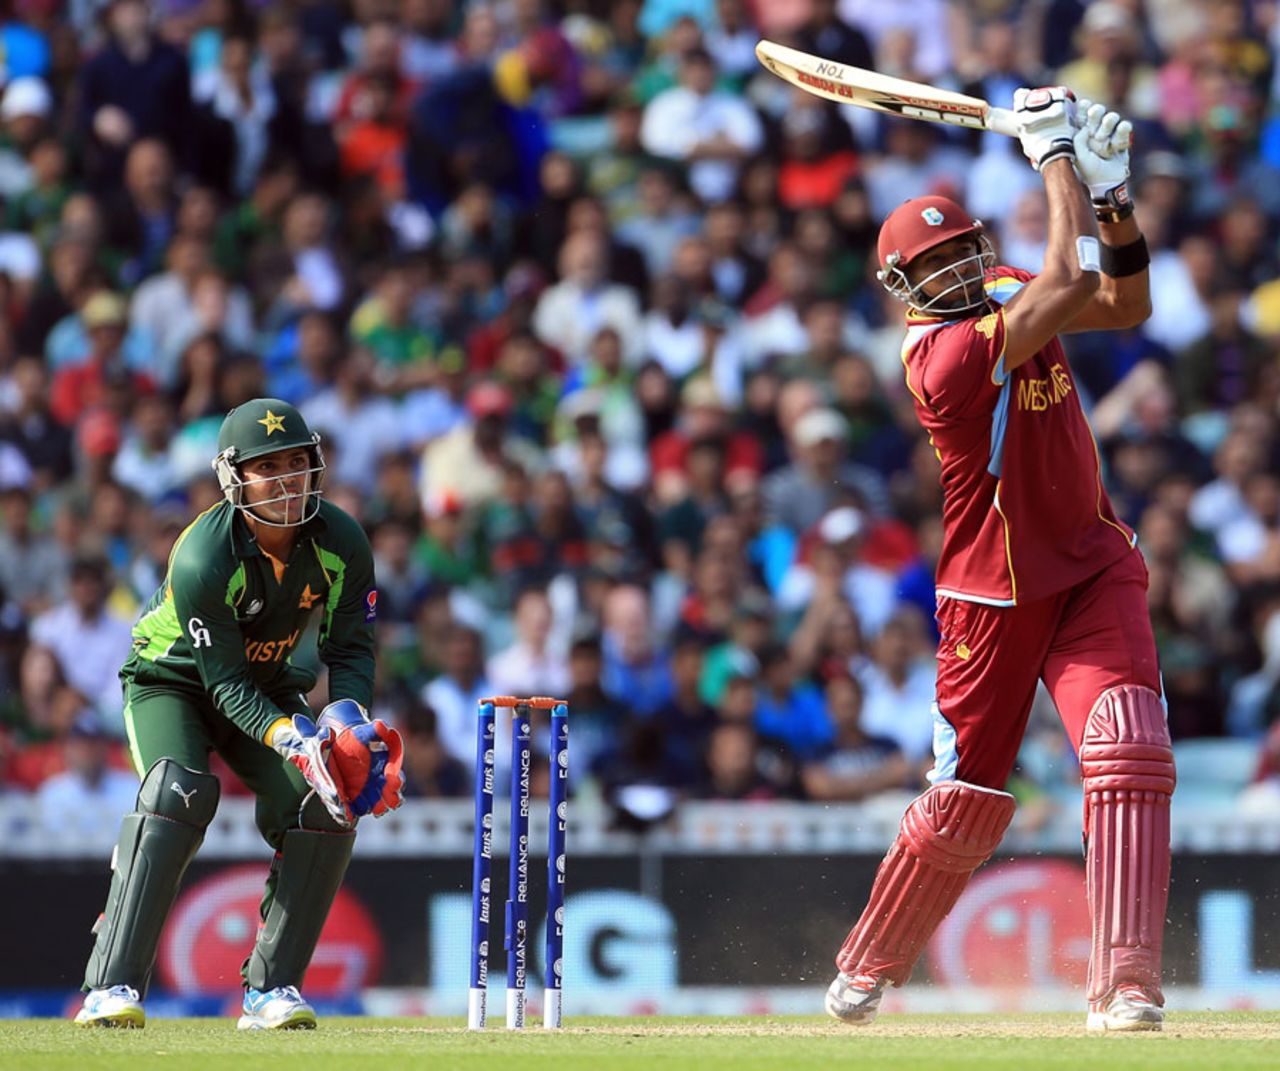 Kieron Pollard hits over the top, West Indies v Pakistan, Champions Trophy, Group B, The Oval, June 7, 2013